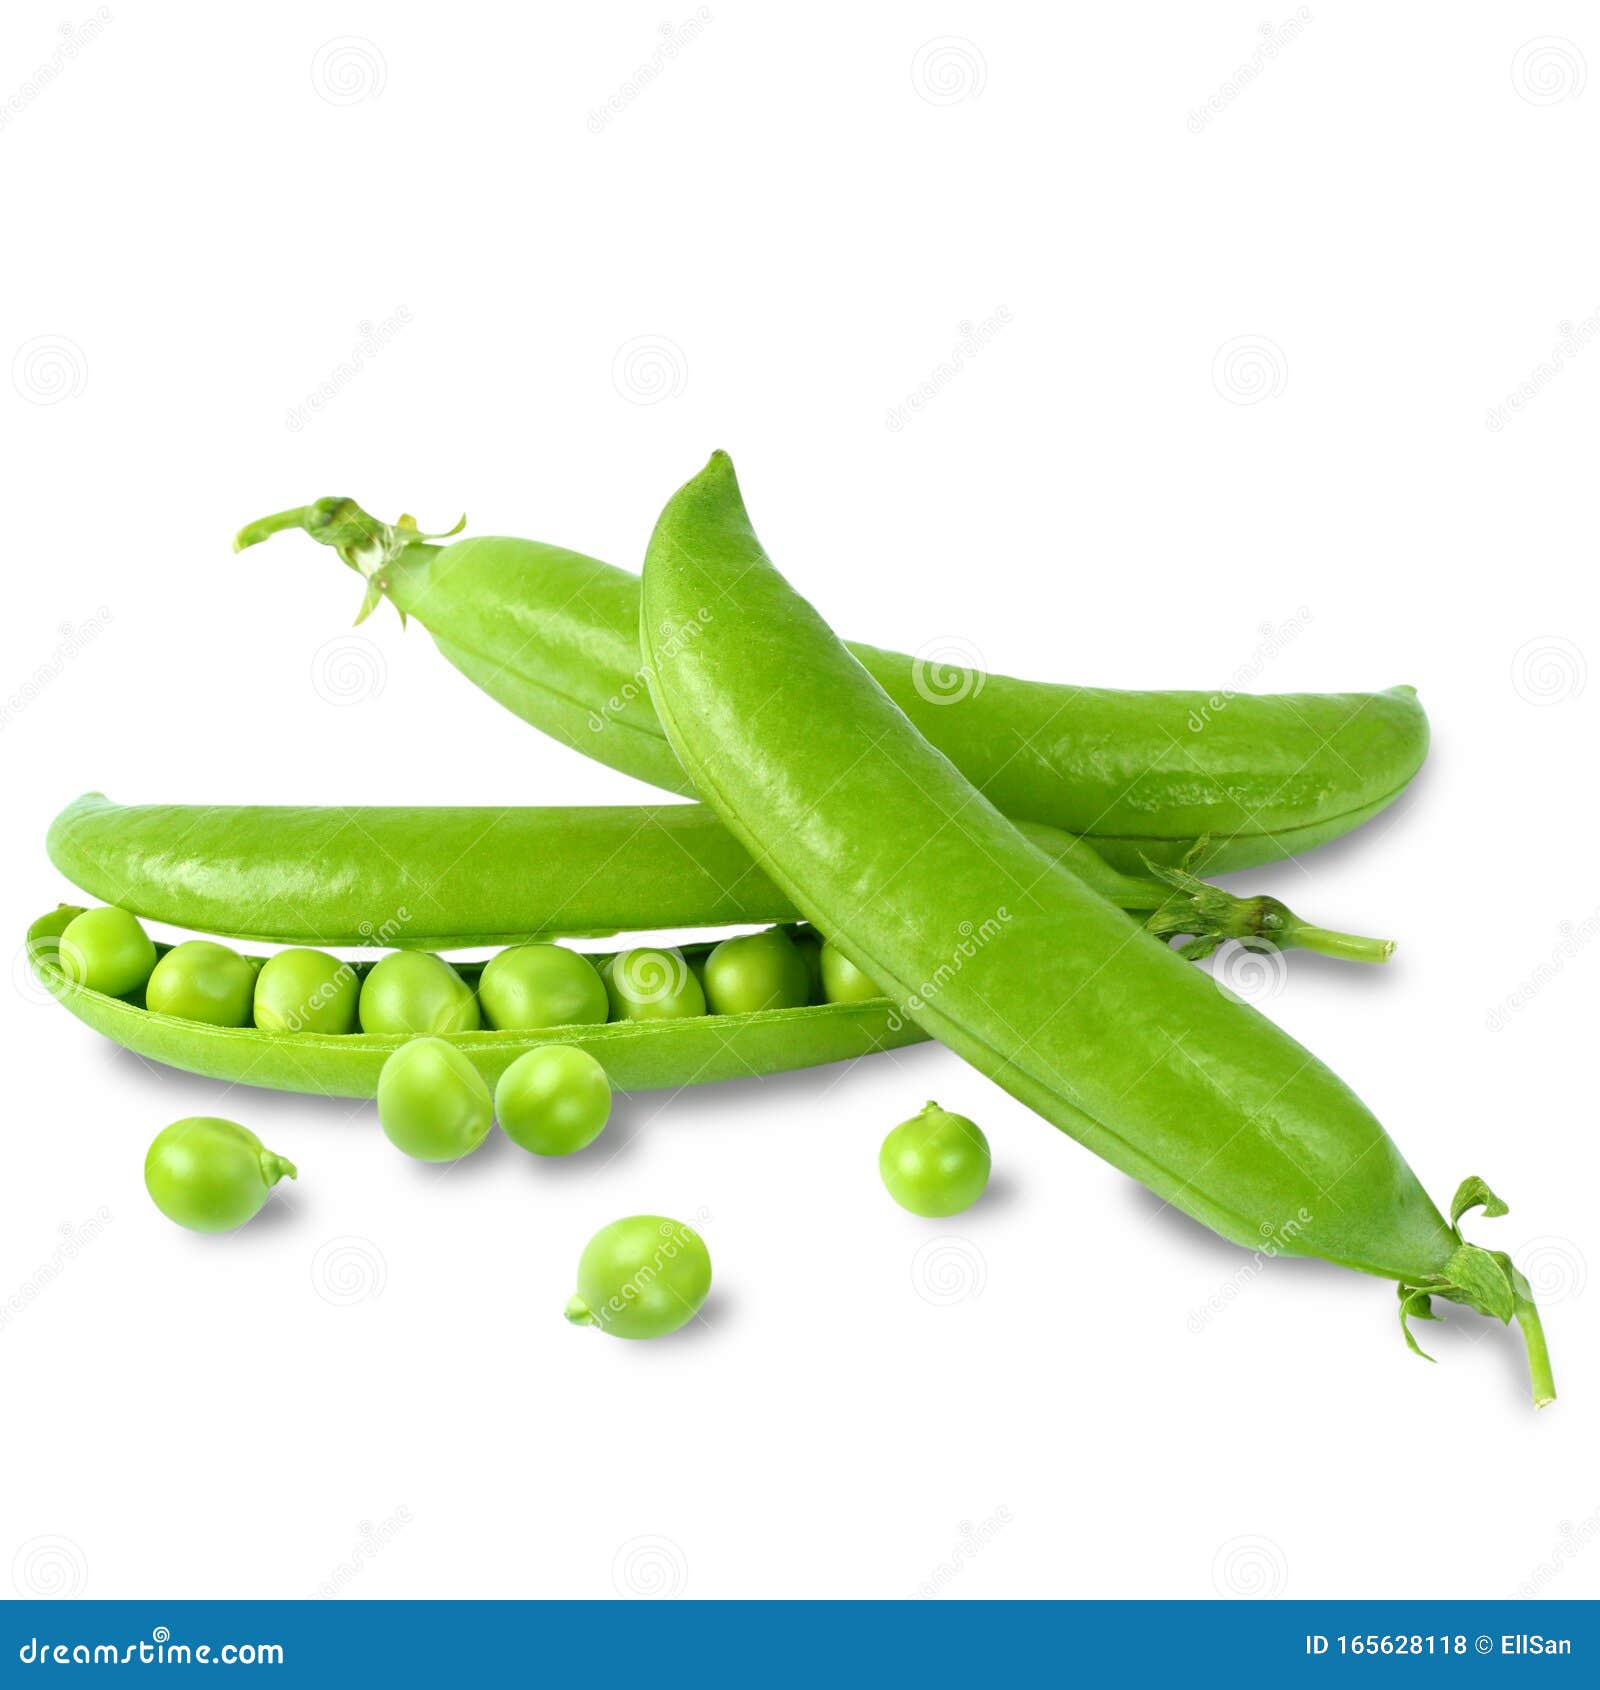 green peas in the pod on a white background